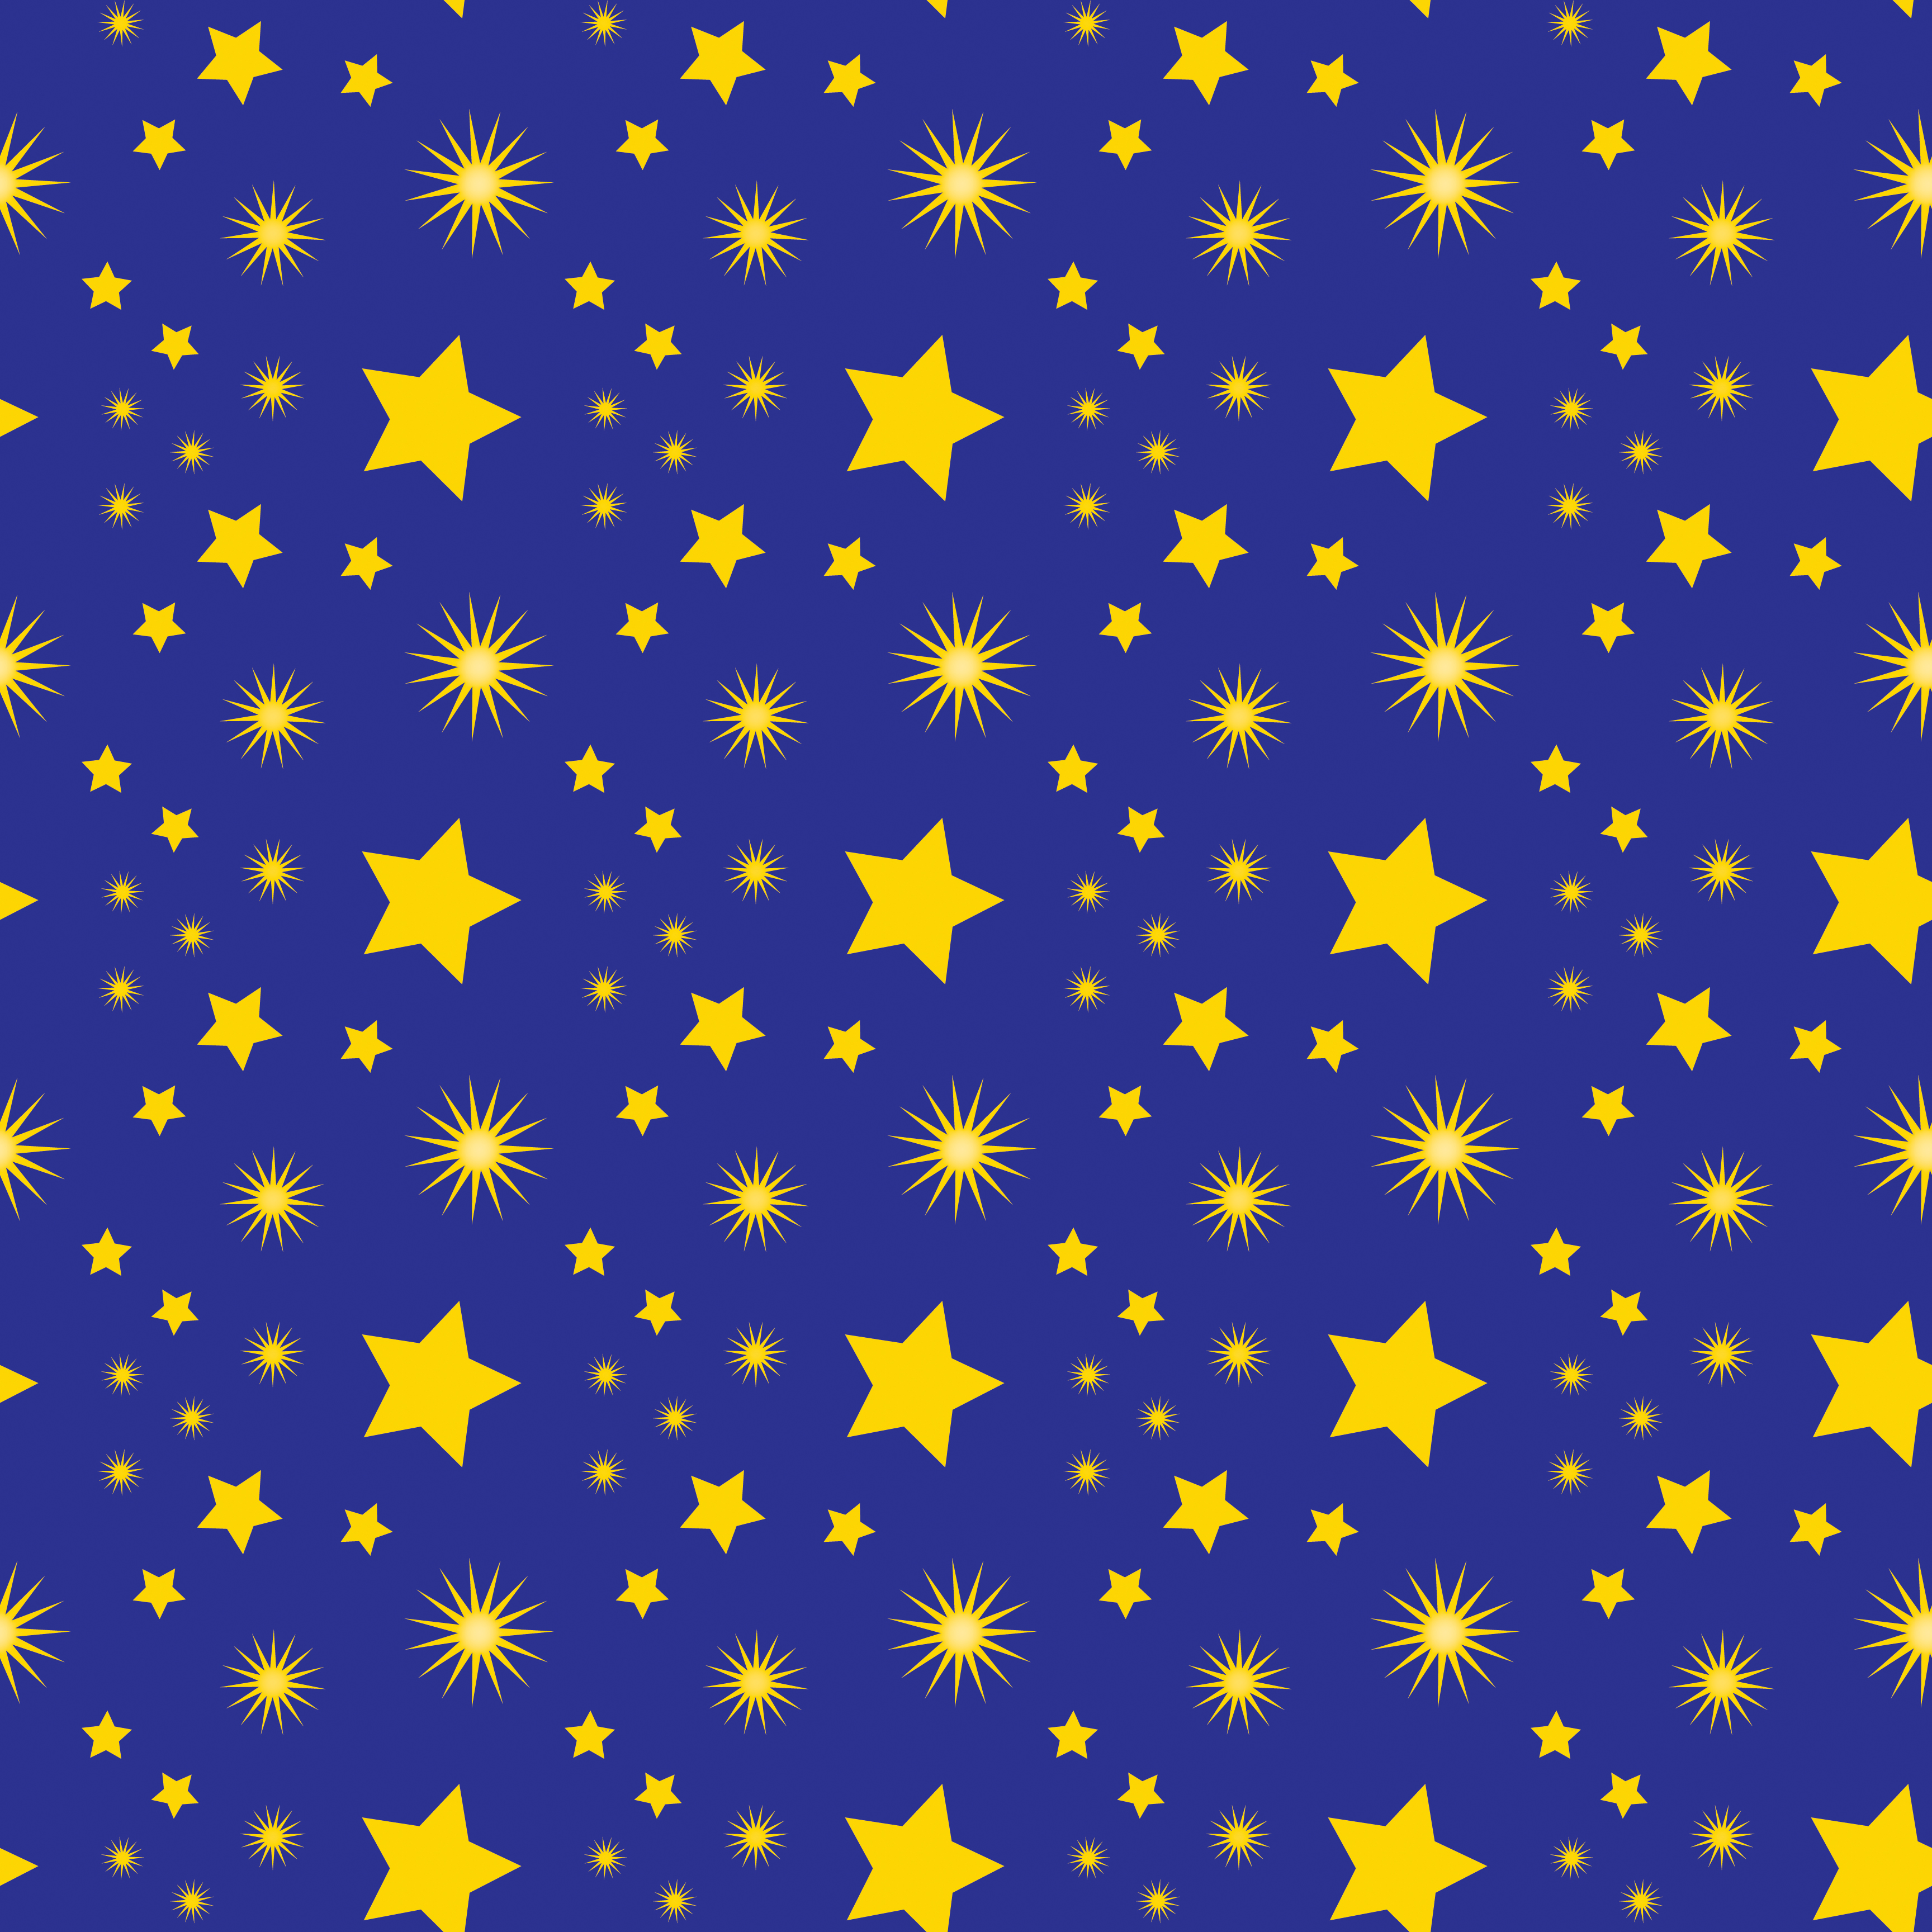 template with gold stars on blue background